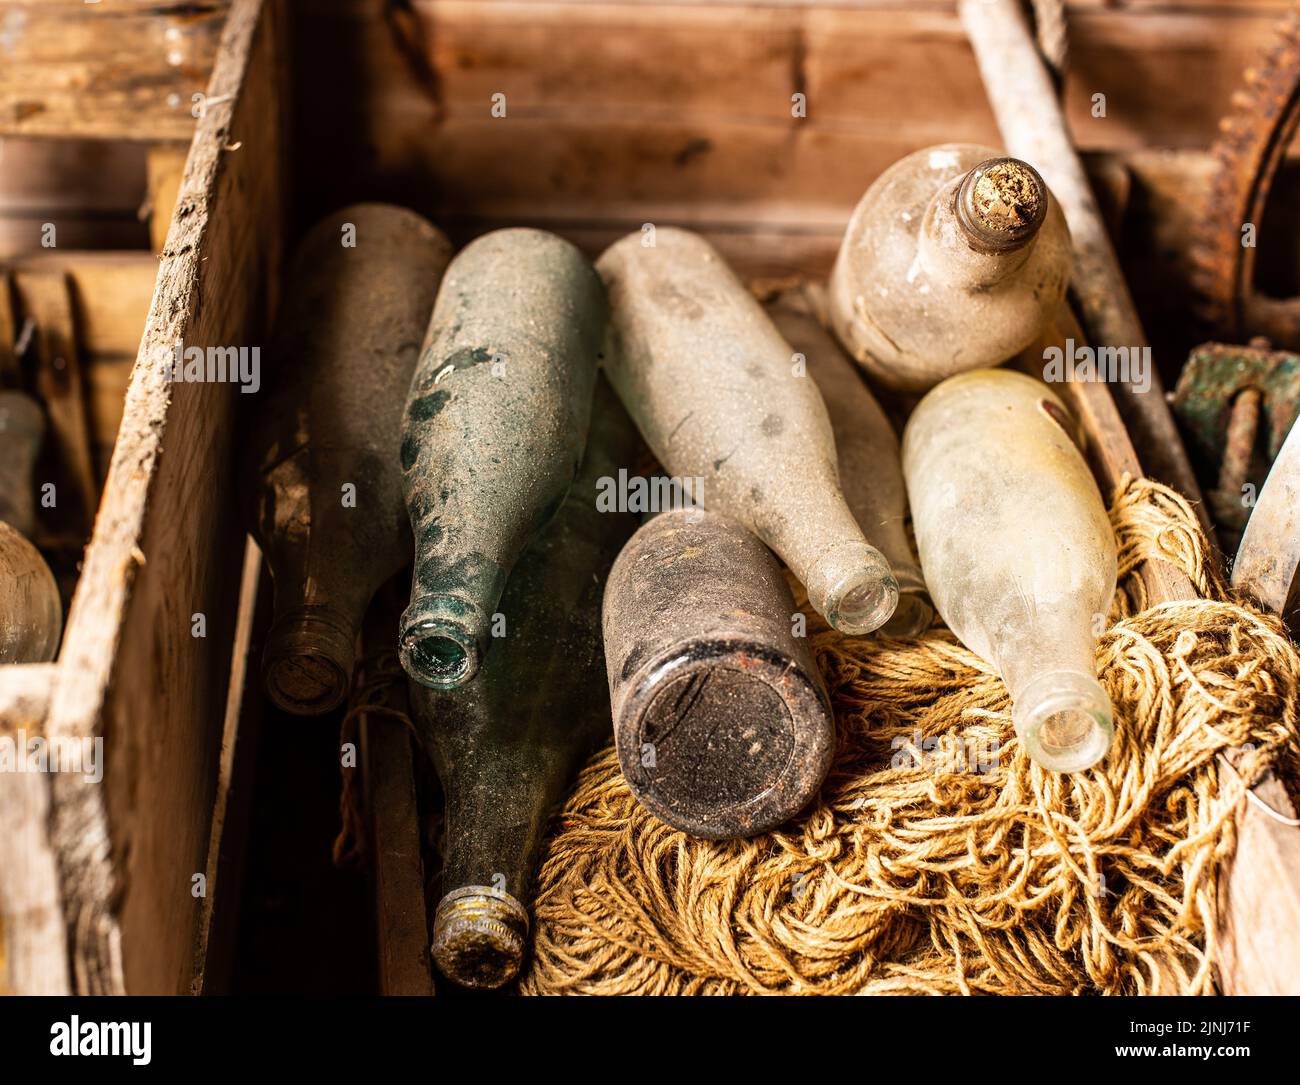 A closeup shot of dusty antique glass bottles in a box Stock Photo